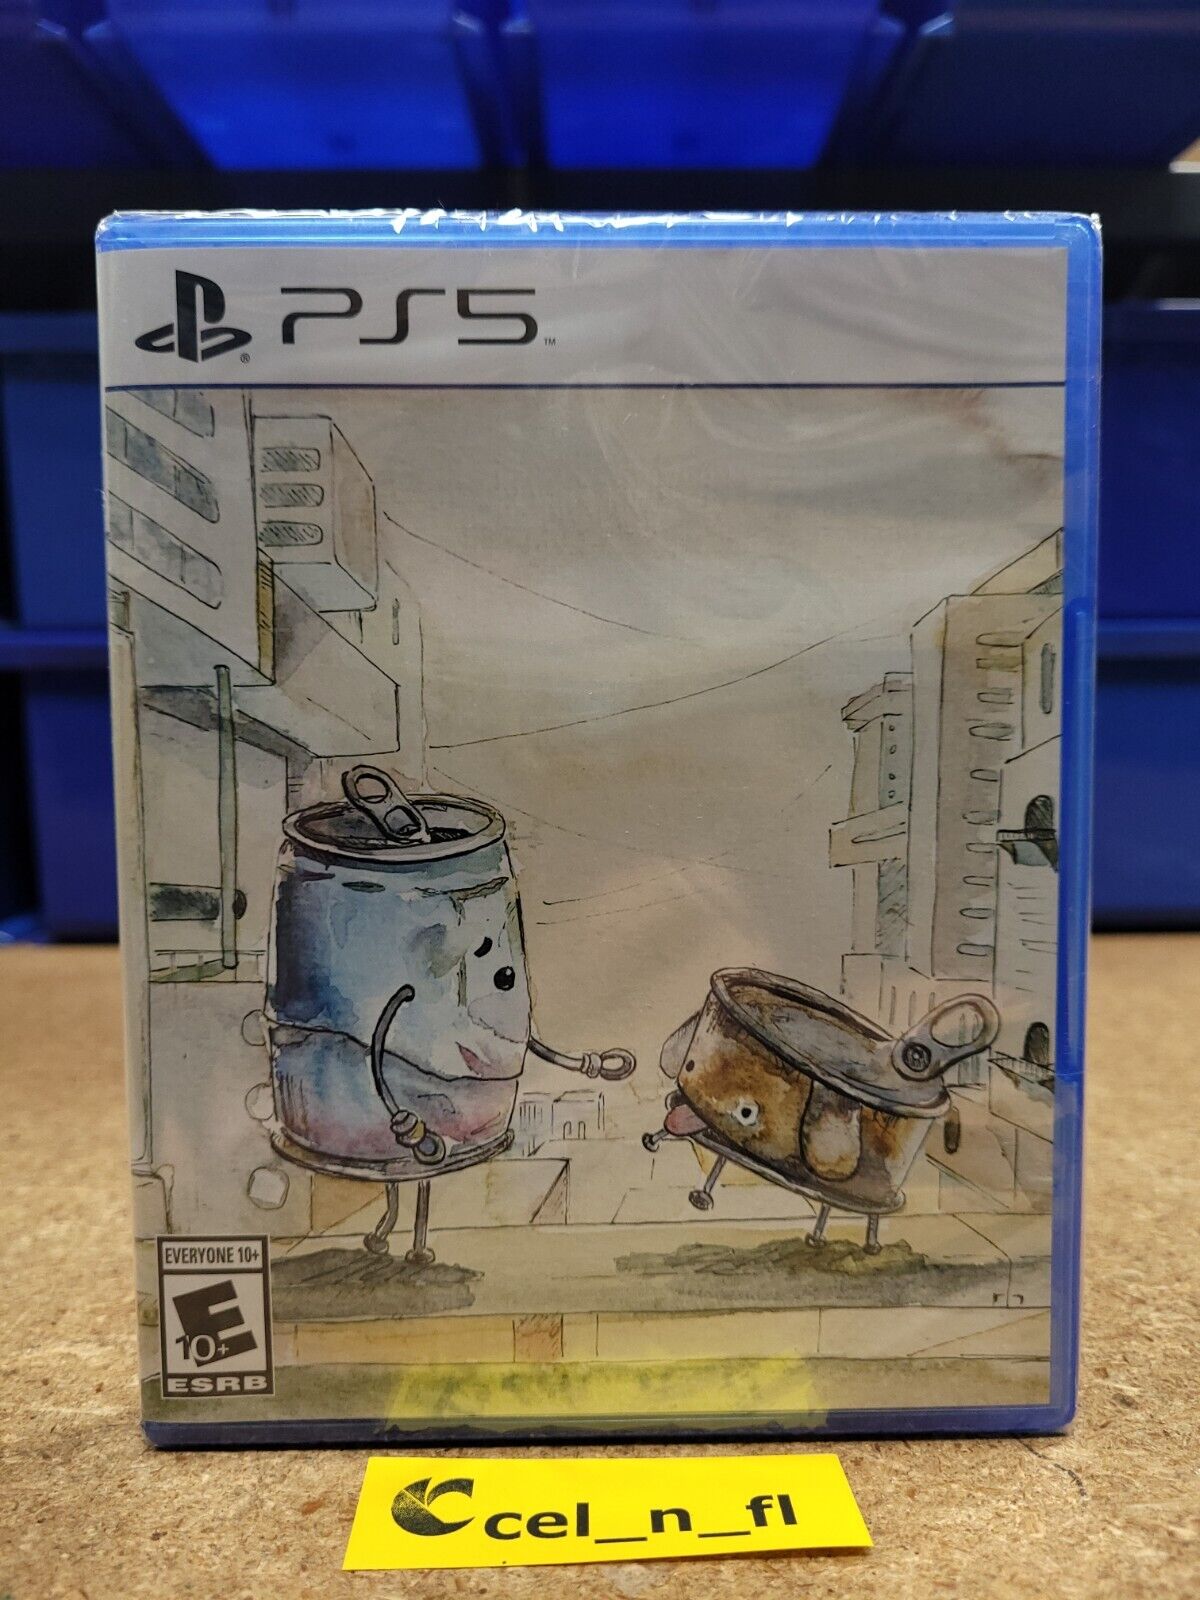 Boxville by Limited Legacy Games RARE NO TITLE VARIANT PS5